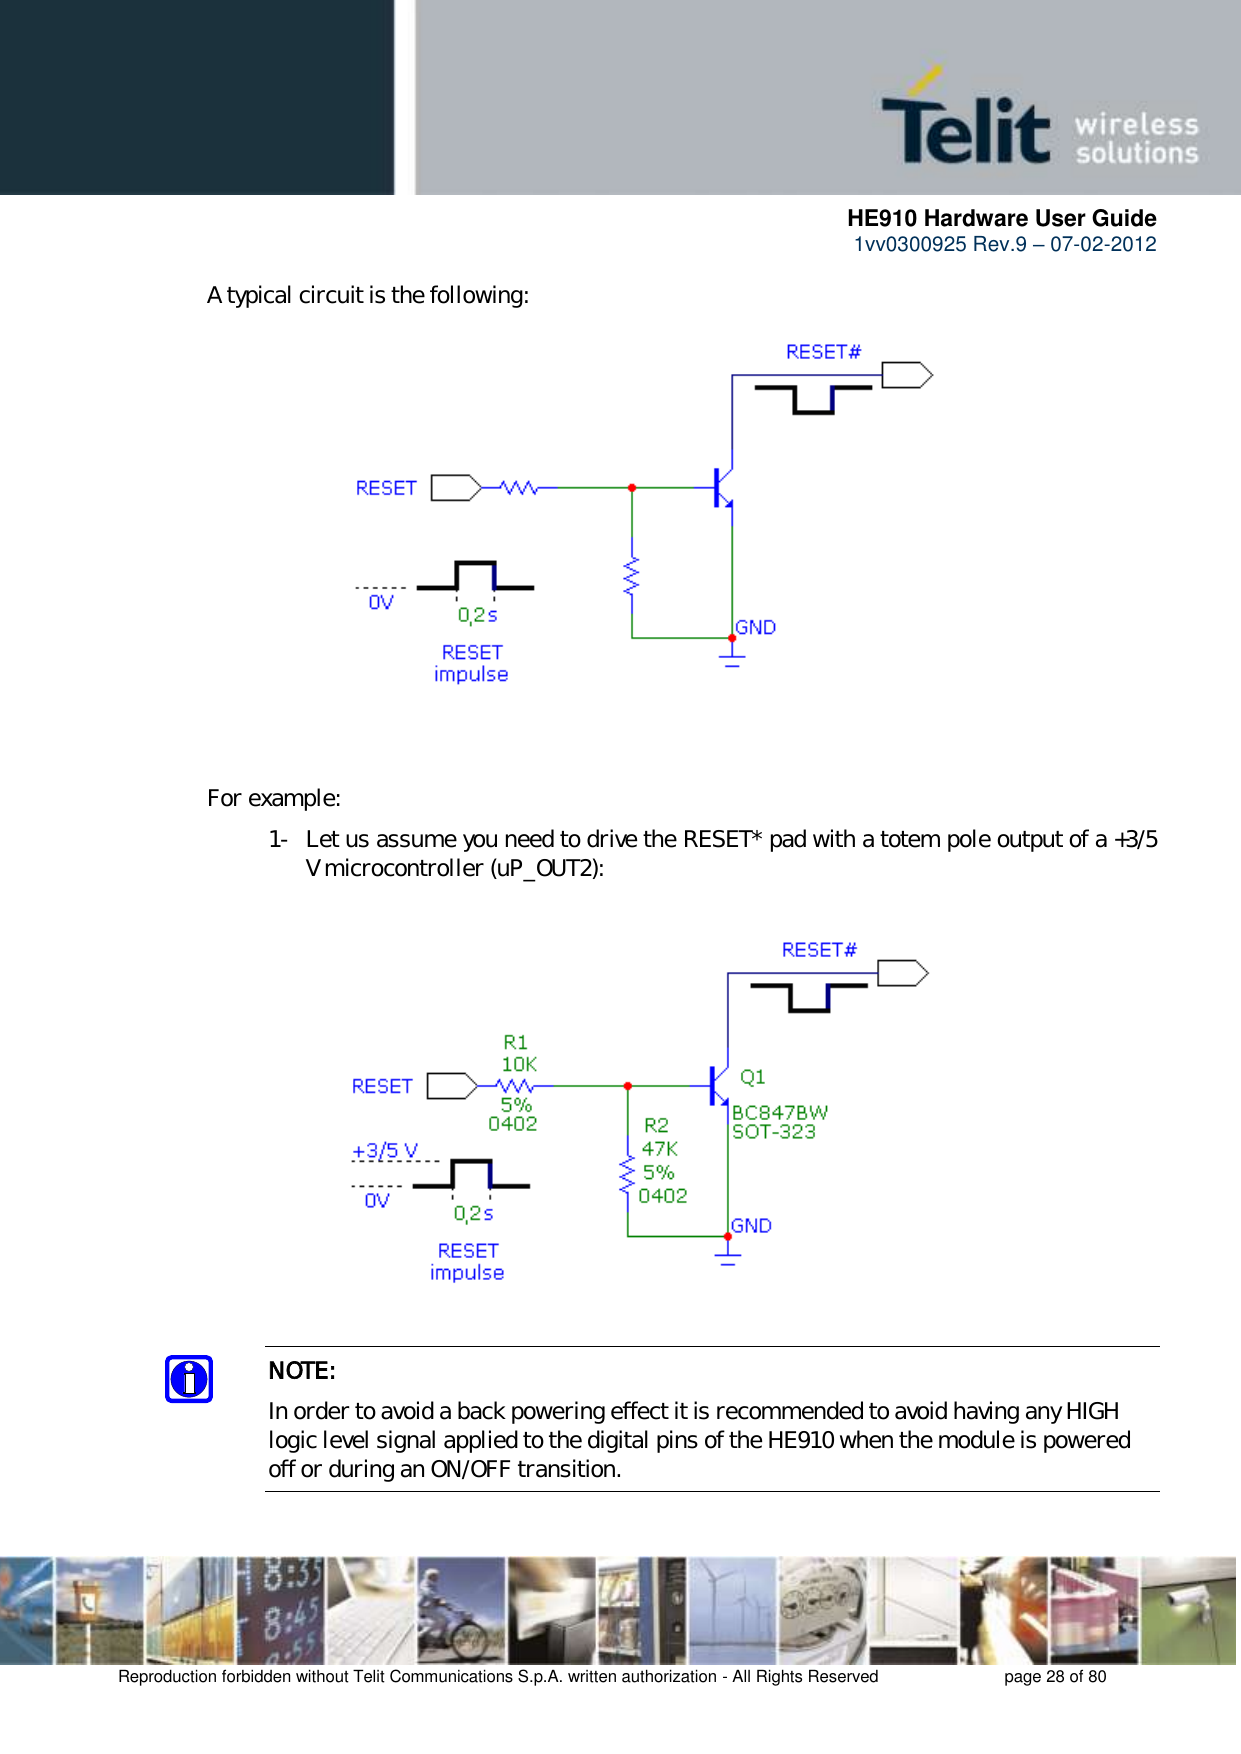      HE910 Hardware User Guide 1vv0300925 Rev.9 – 07-02-2012    Reproduction forbidden without Telit Communications S.p.A. written authorization - All Rights Reserved    page 28 of 80   A typical circuit is the following:      For example: 1- Let us assume you need to drive the RESET* pad with a totem pole output of a +3/5 V microcontroller (uP_OUT2):    NOTE: In order to avoid a back powering effect it is recommended to avoid having any HIGH logic level signal applied to the digital pins of the HE910 when the module is powered off or during an ON/OFF transition.  